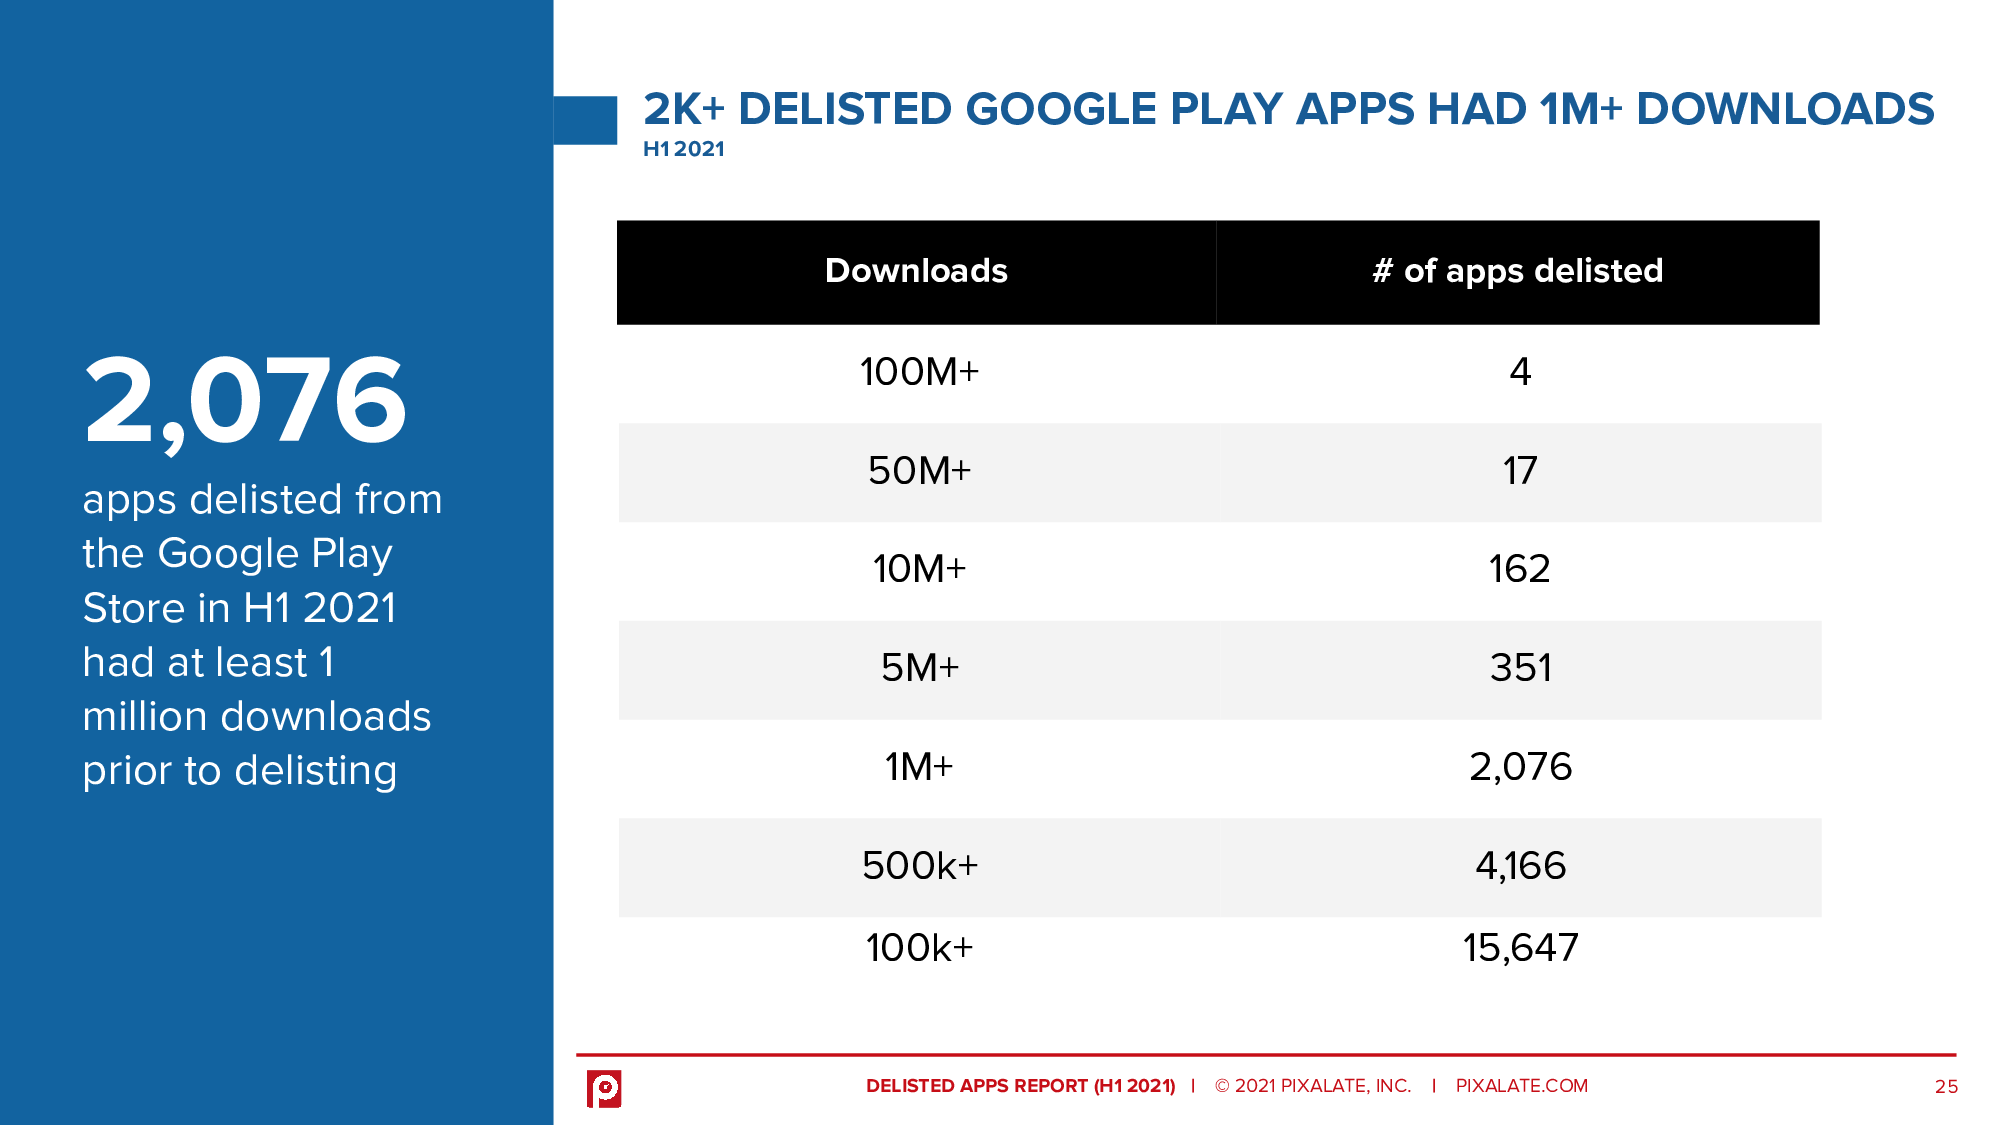 2,076 apps delisted from the Google Play Store in H1 2021 had at least 1 million downloads prior to delisting